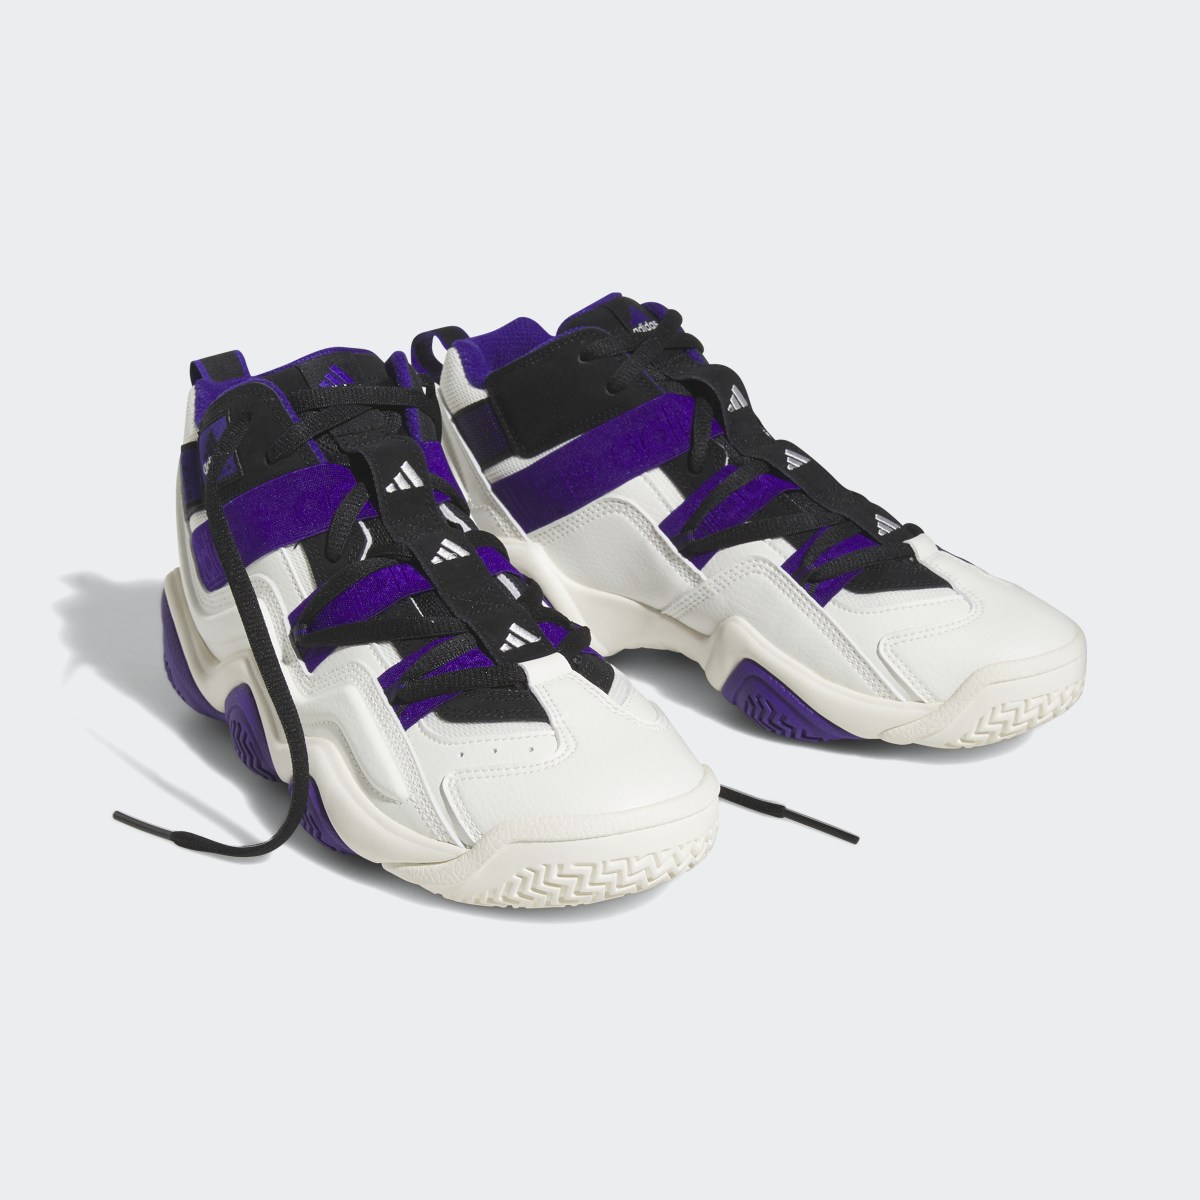 Adidas Chaussure Top 10 2000. 5